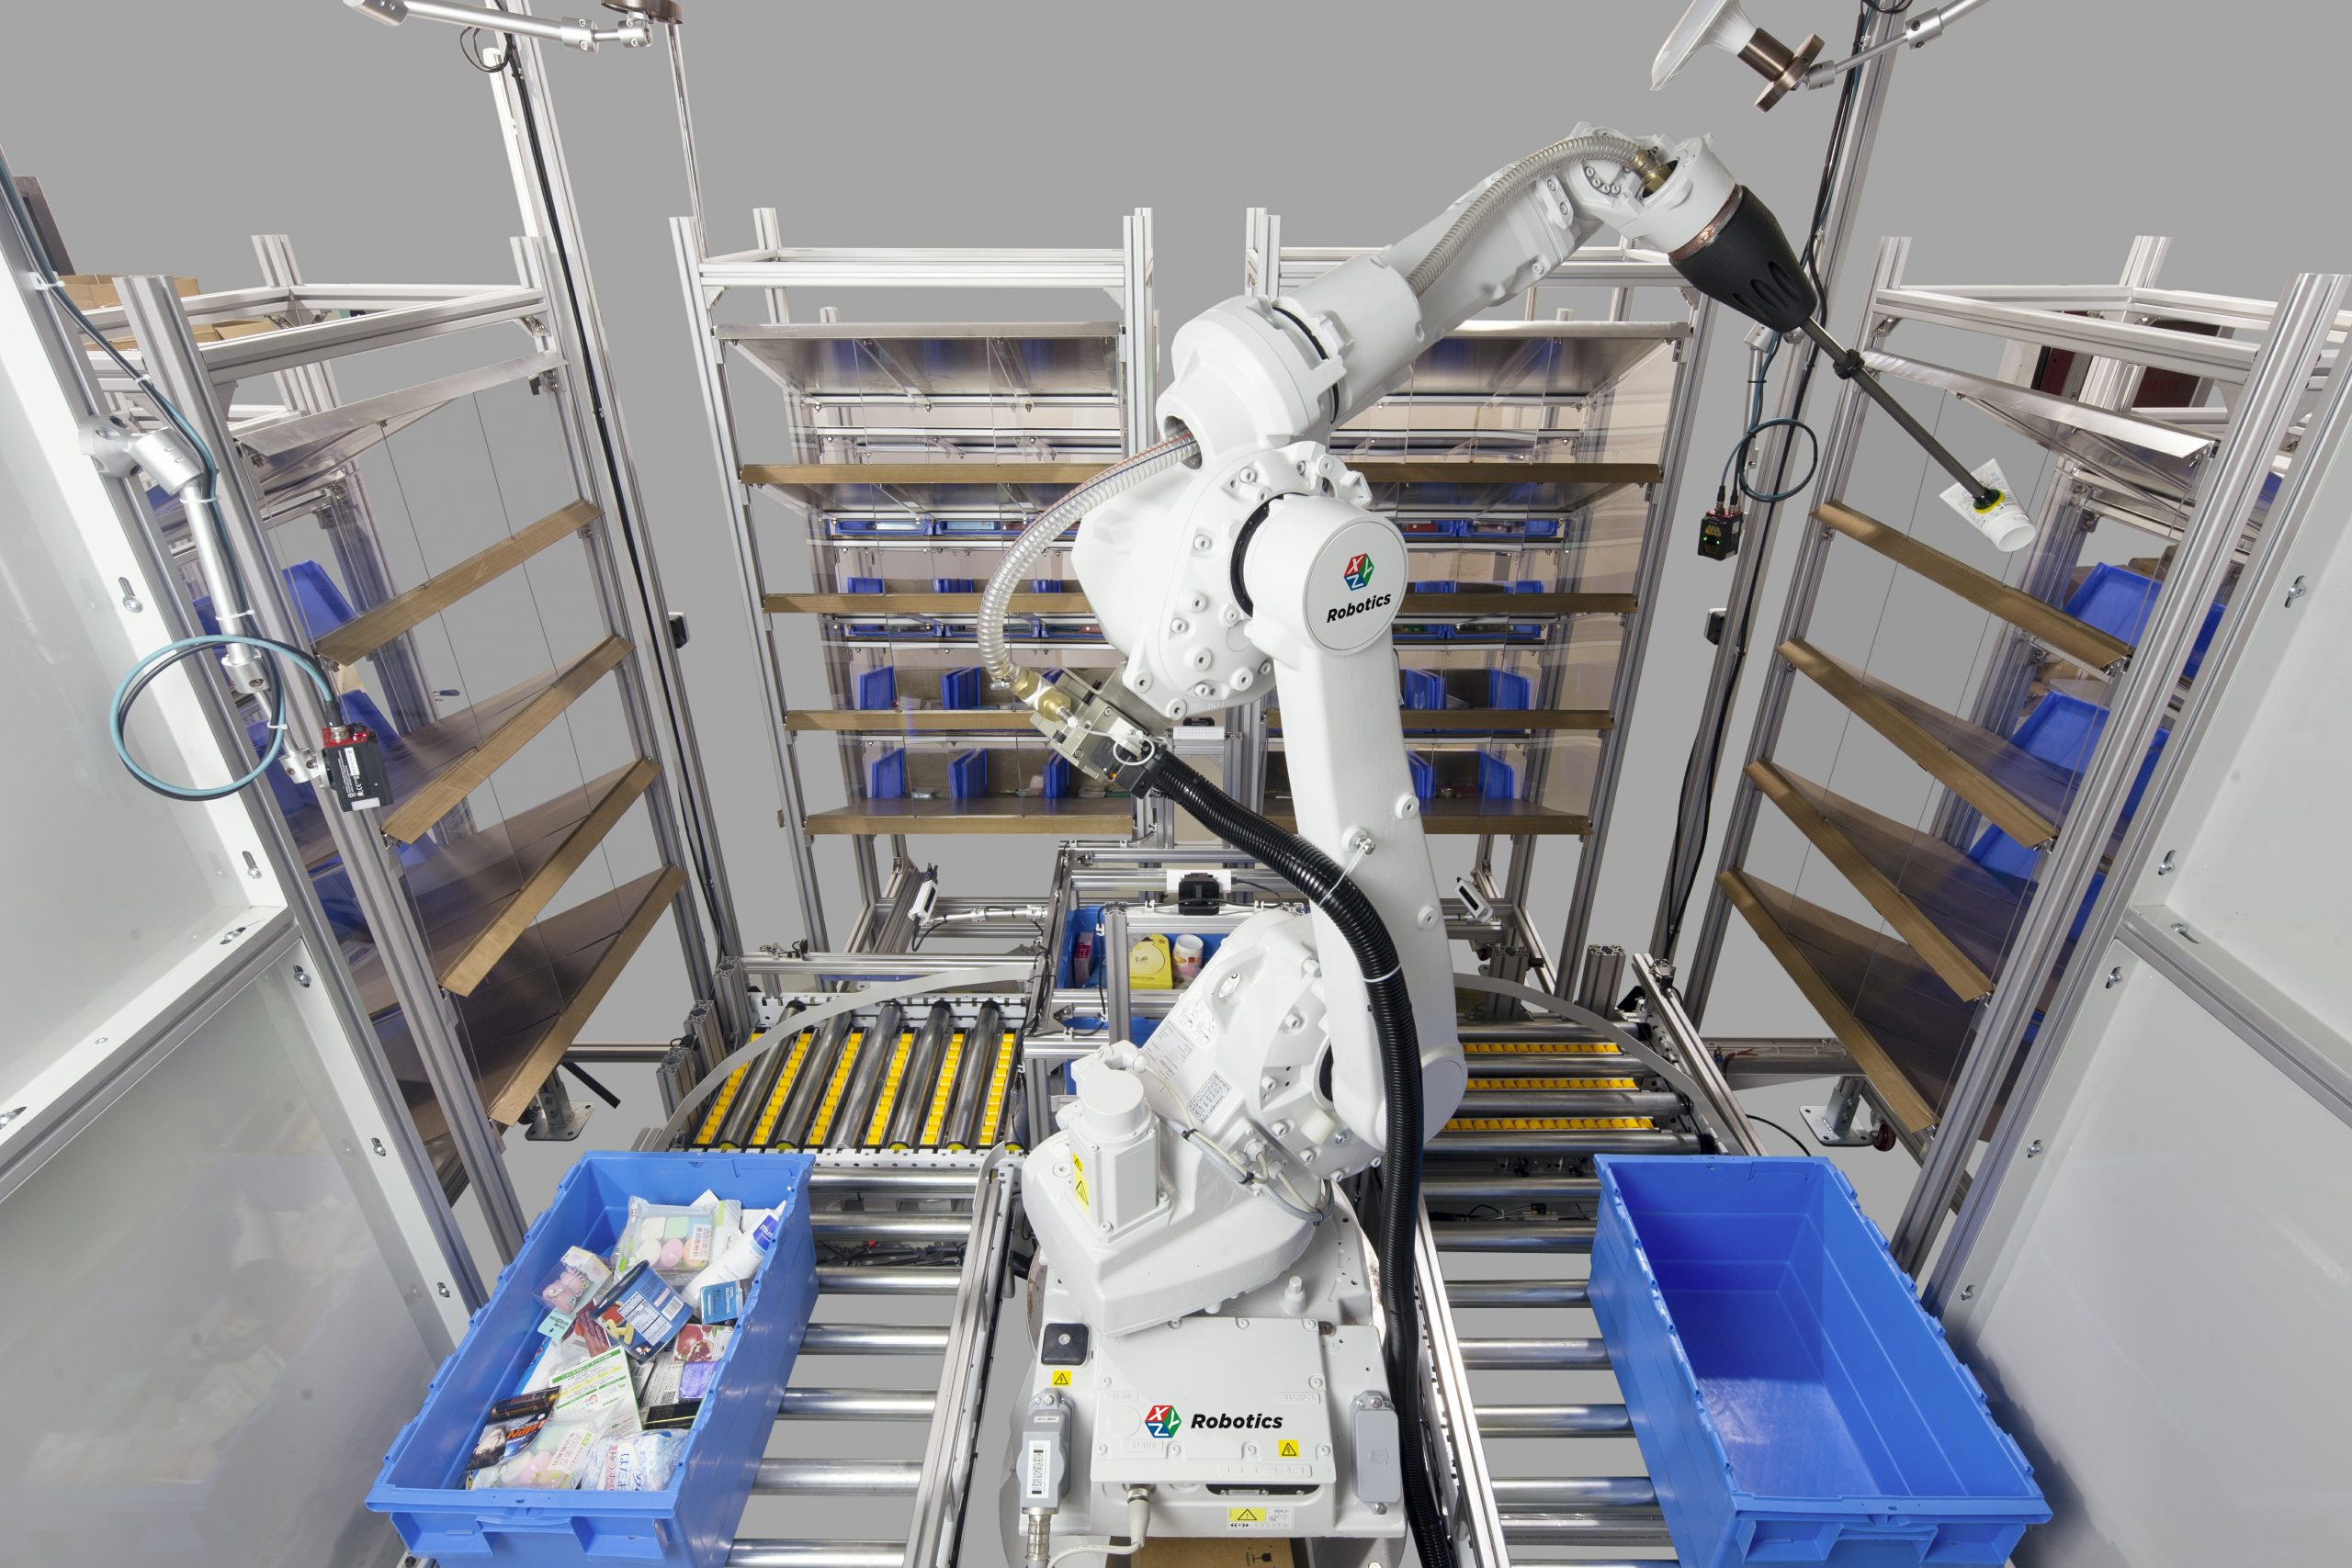 XYZ Robotics wants to free humans from menial labor inside warehouses: Inside China’s Startups